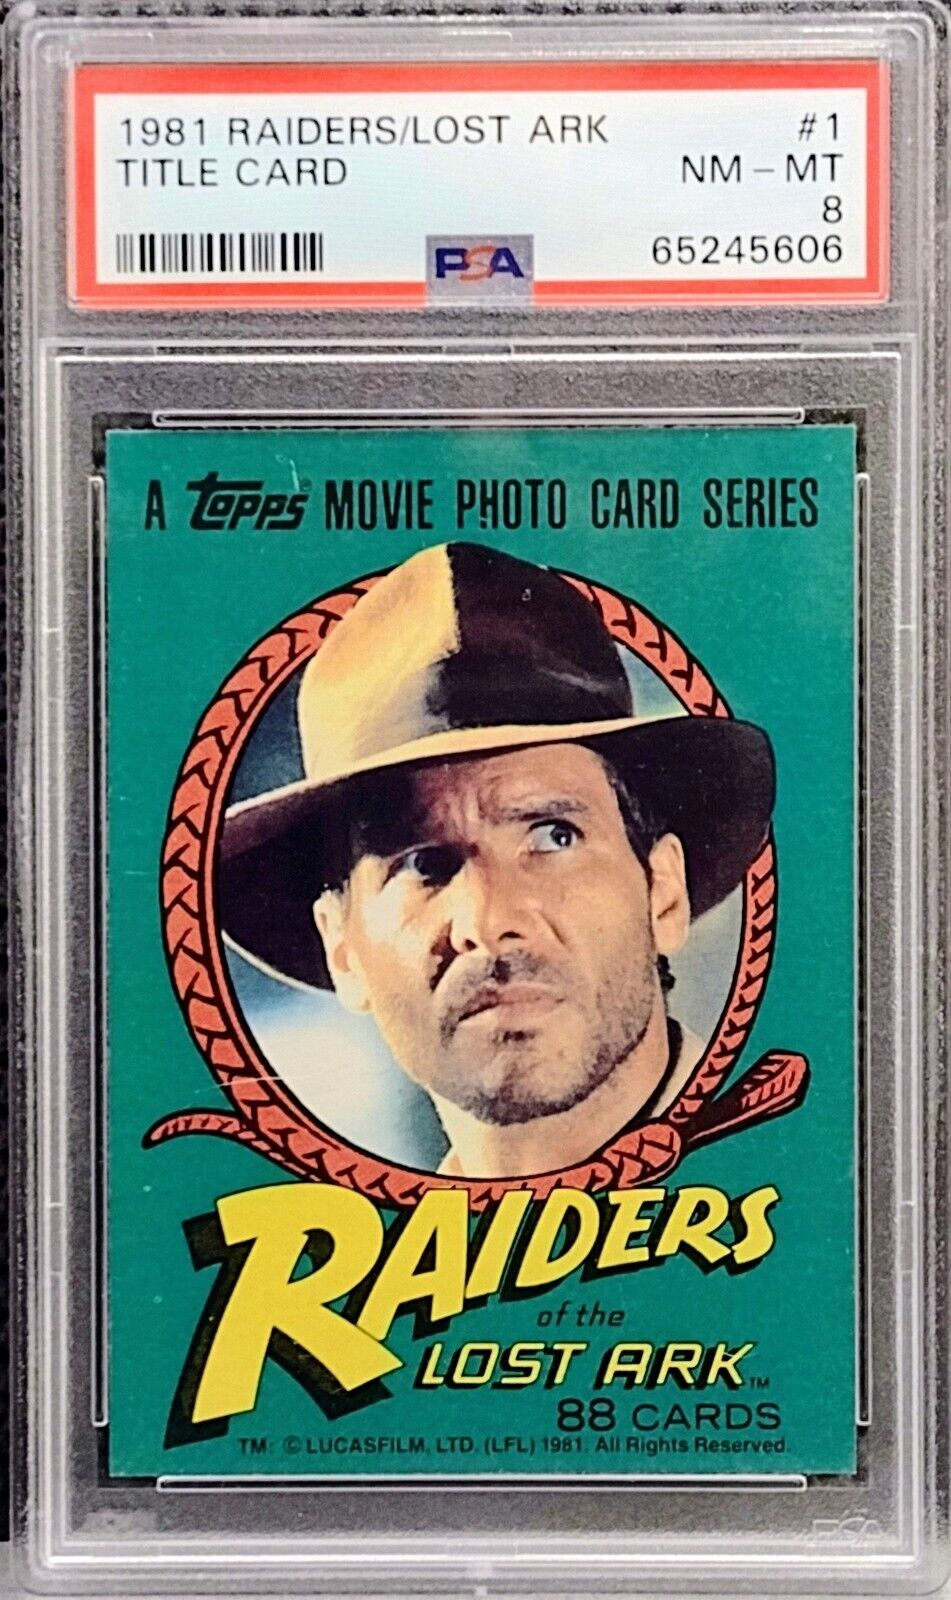 1981 Topps Raiders of the Lost Ark #1 INDIANA JONES - PSA 8 NM-MT - TITLE CARD